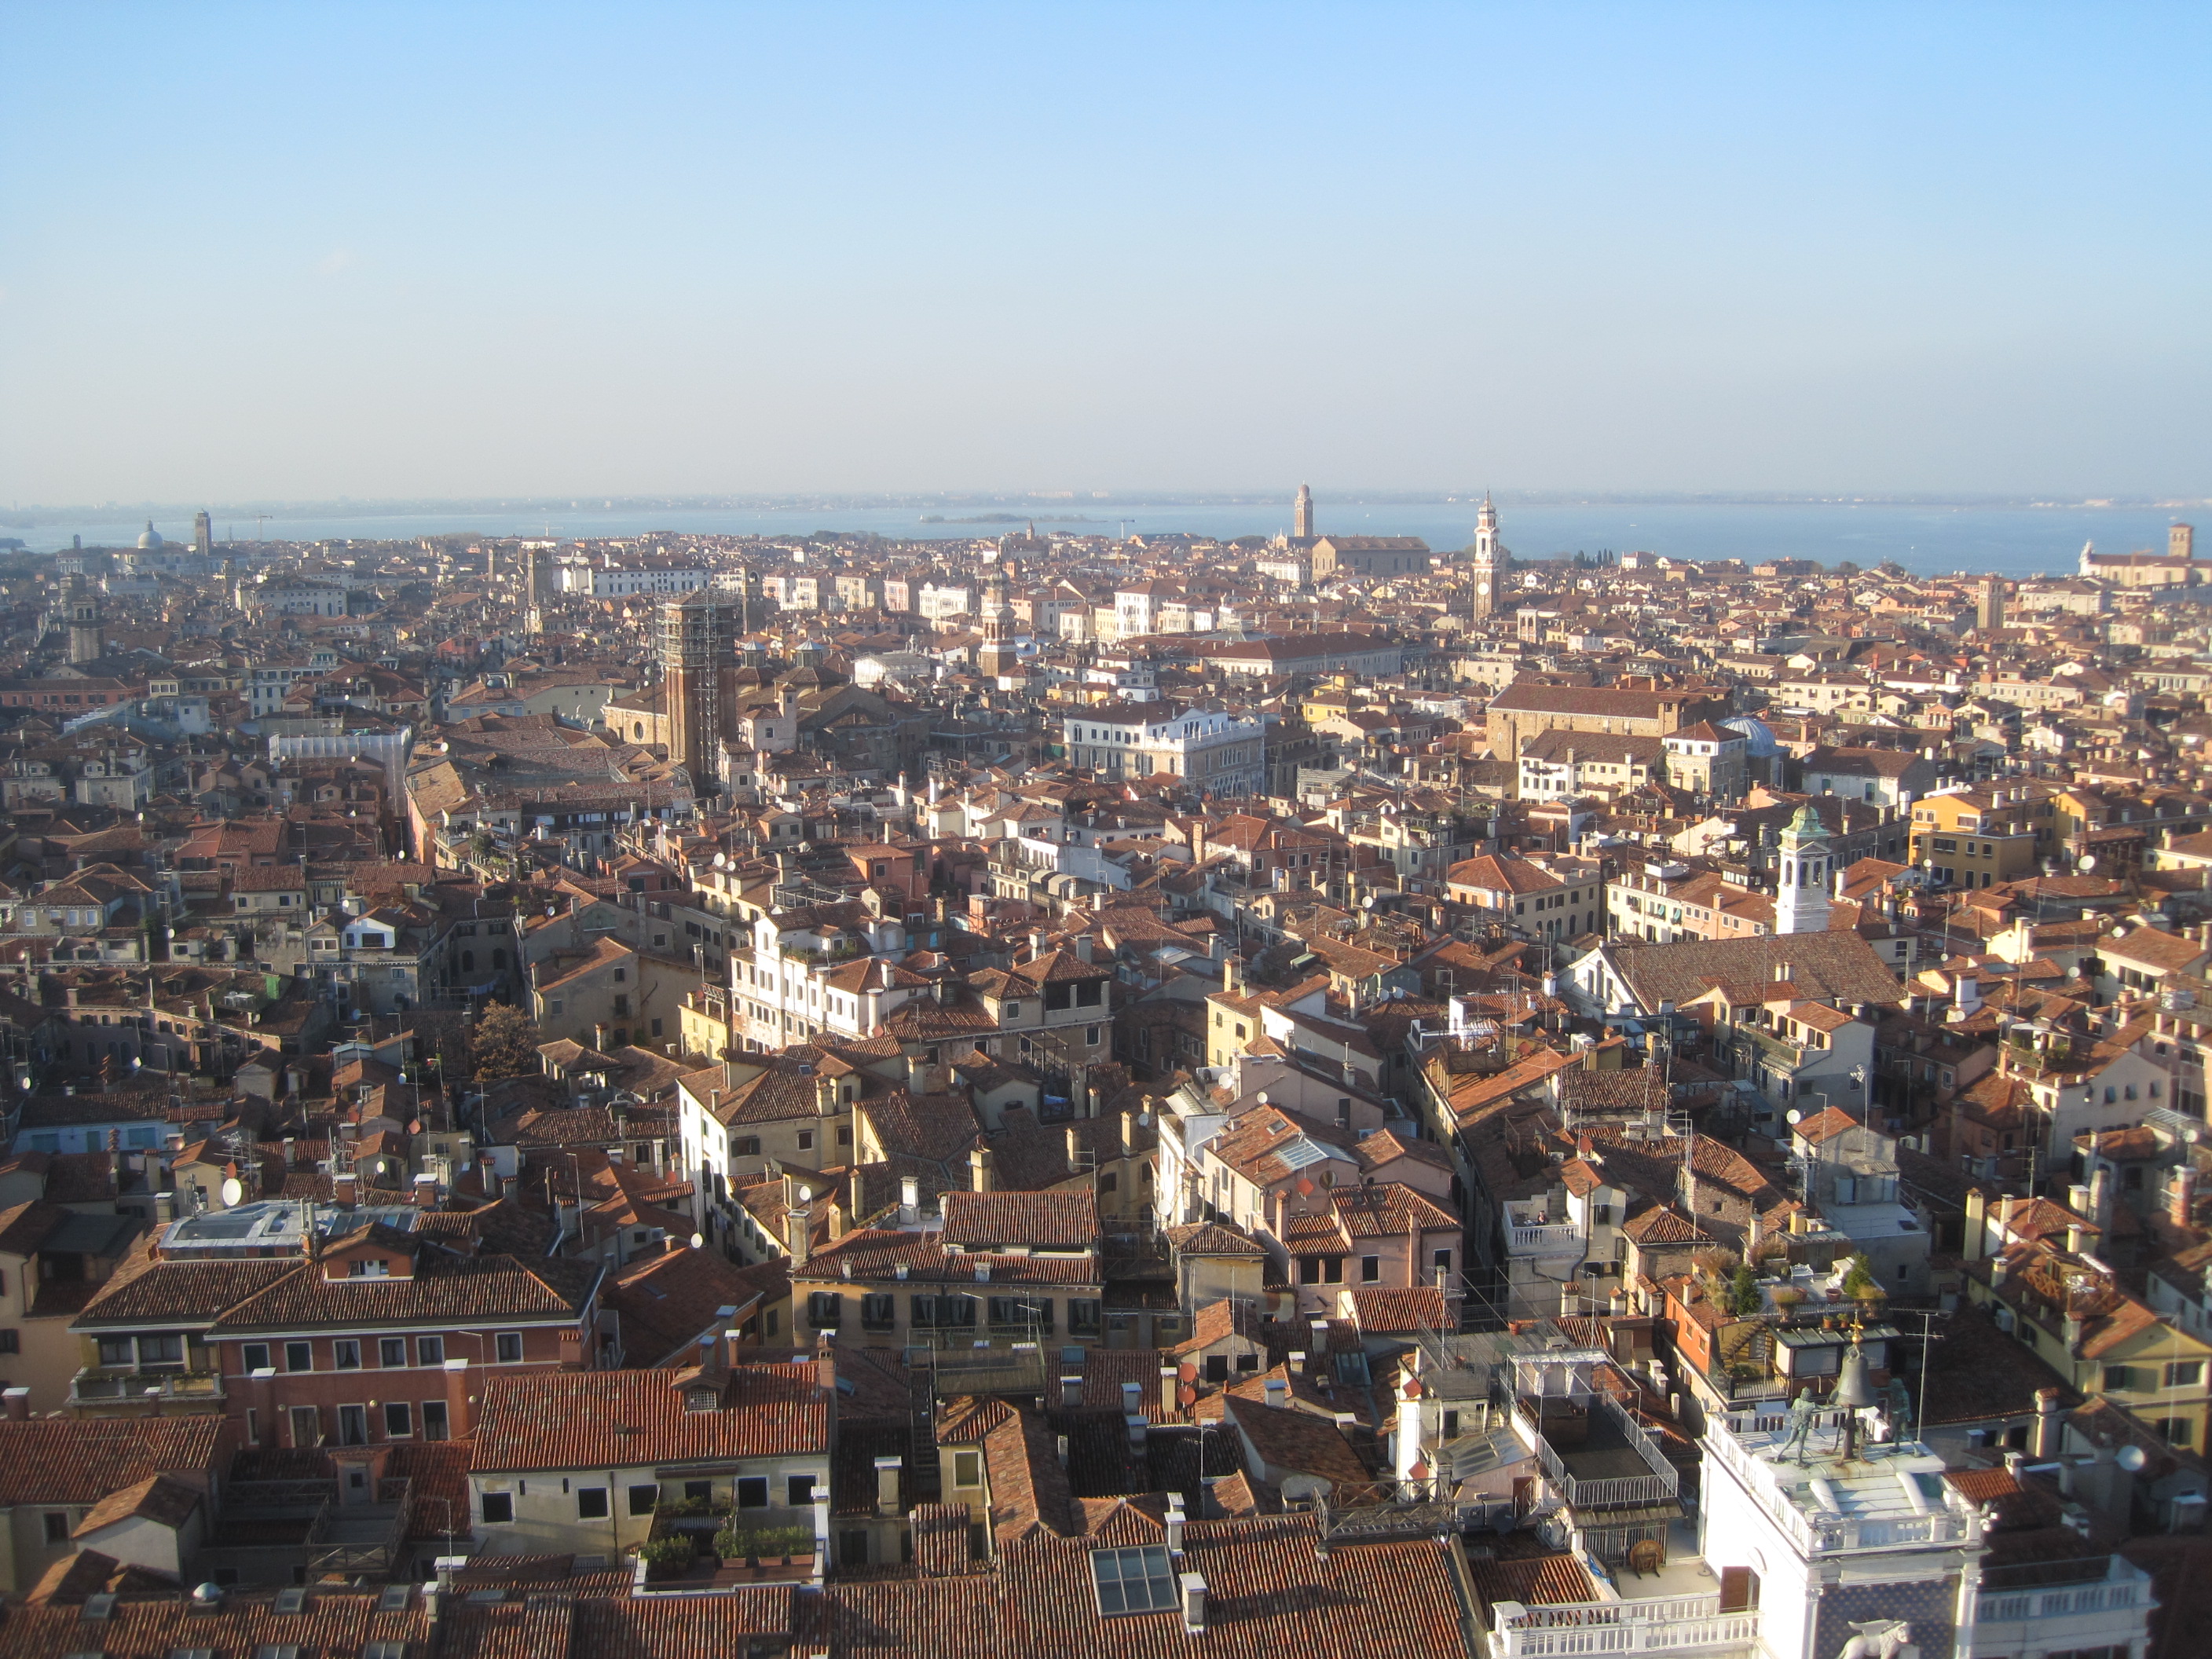 The rooftops of Venice from the Campanile